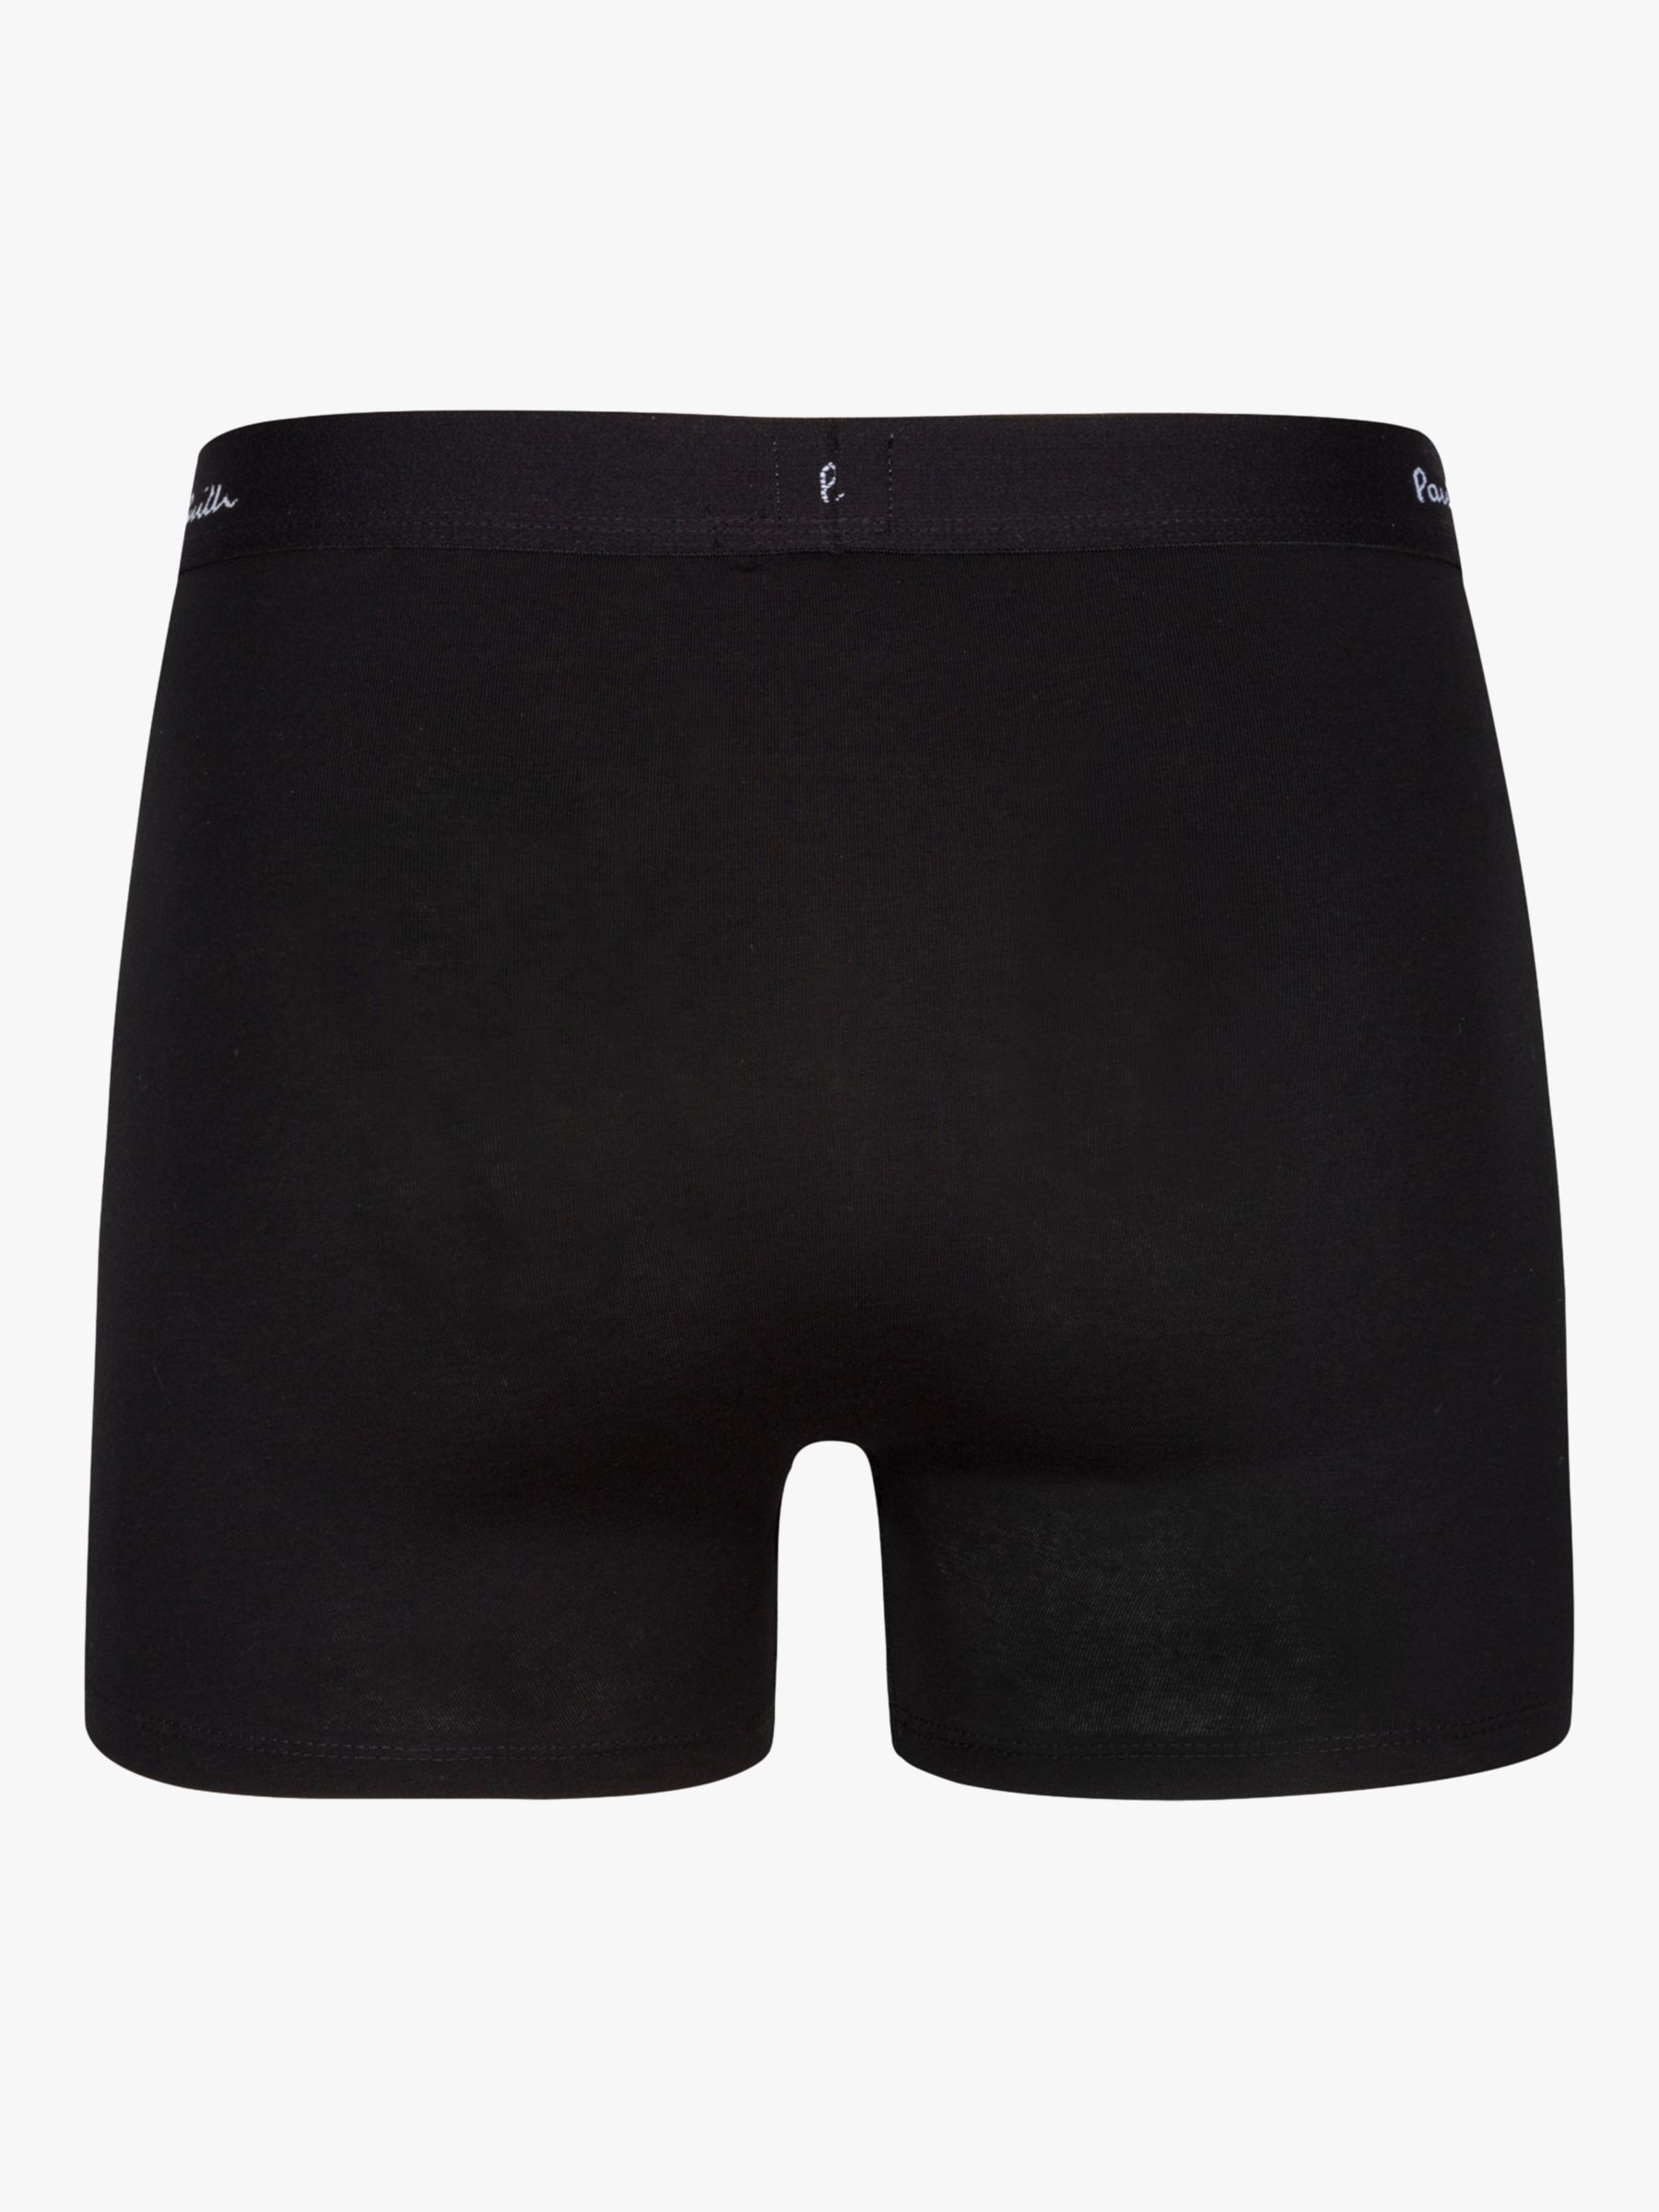 Boxer Brief - Smashed Avo  Step One Men's Bamboo Underwear